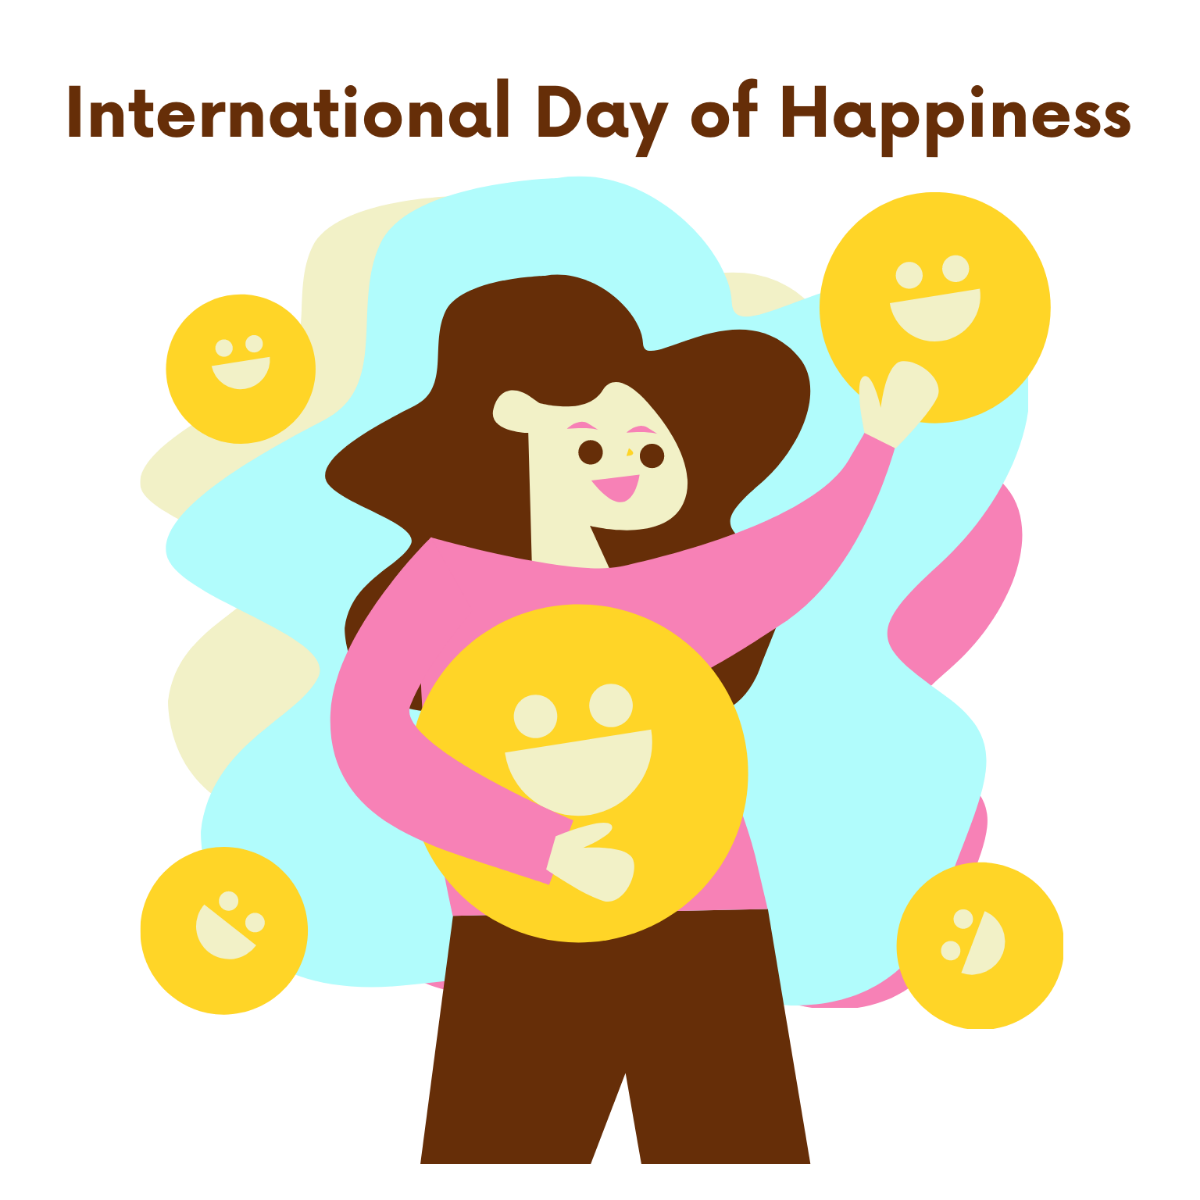 Free International Day of Happiness Cartoon Vector Template